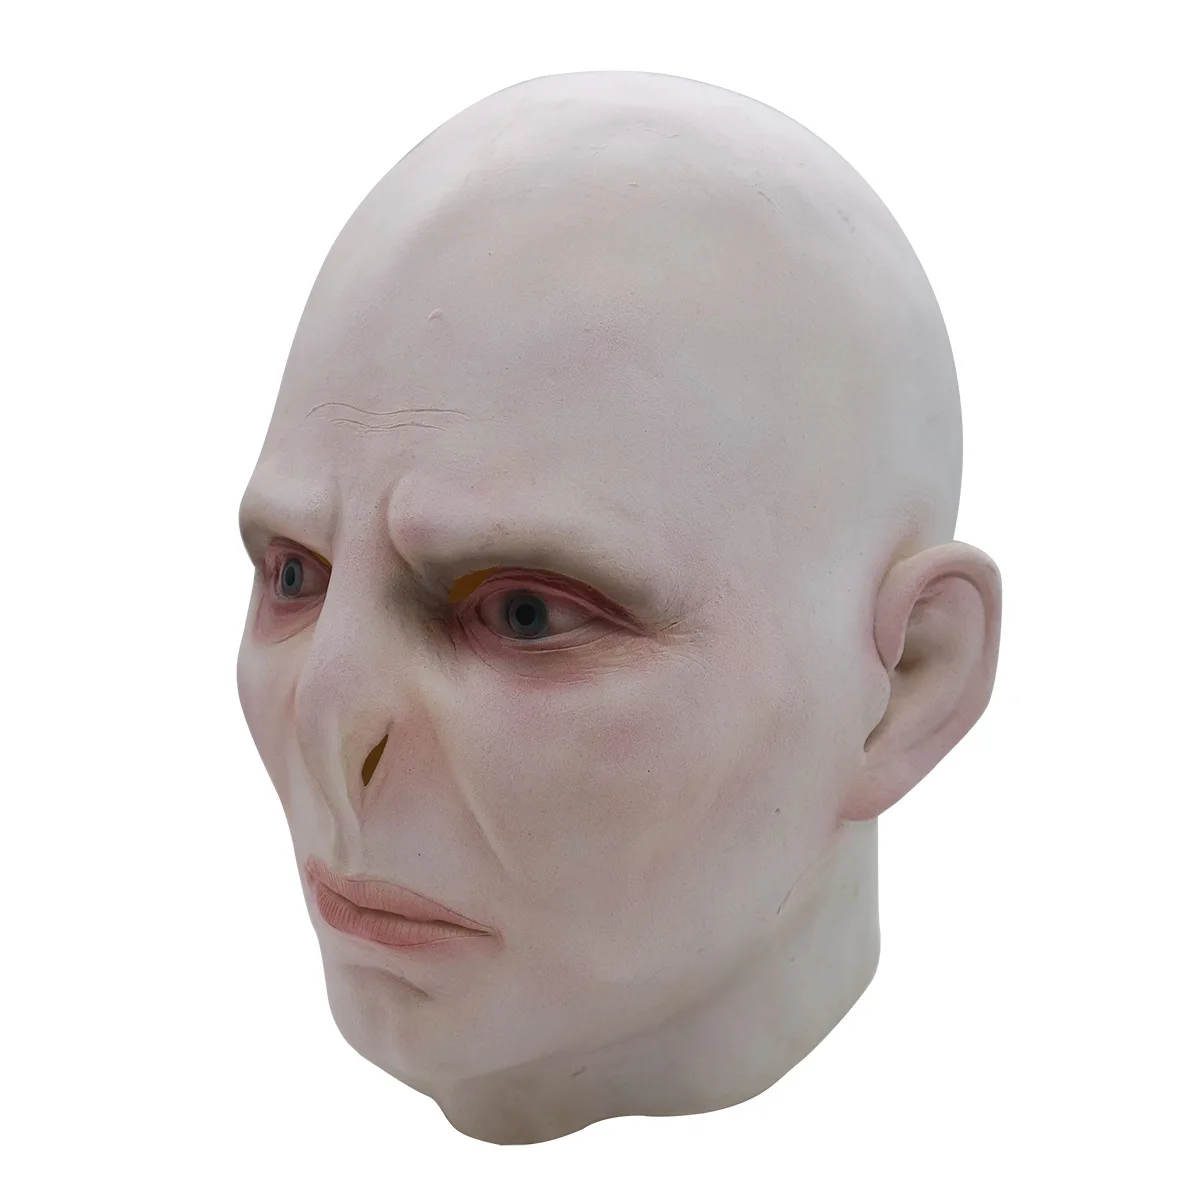 New Cosplay Horror Lord Voldemort Full Head Masquerade Mask Party Movie The Dark Lord Cosplay Human Scary Mask Adult& Child